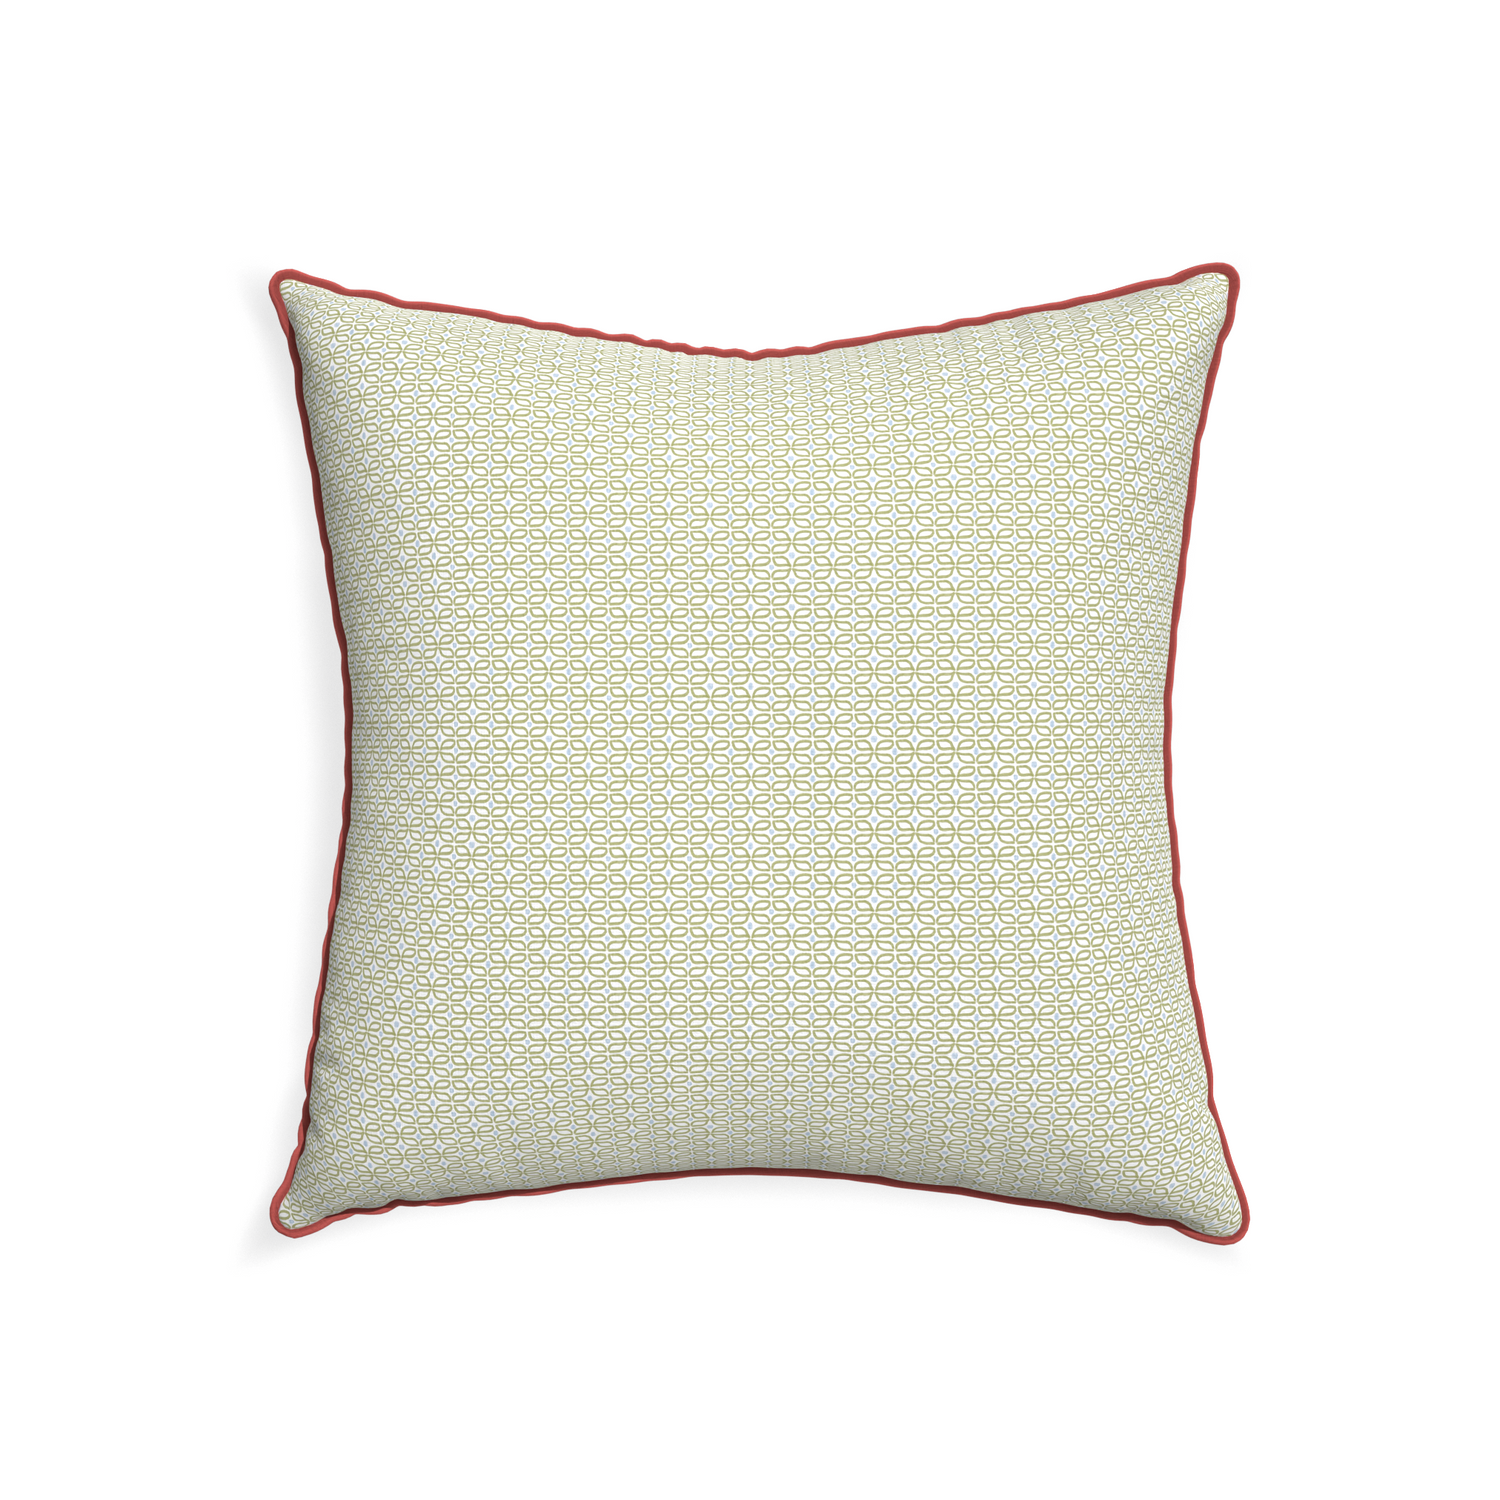 22-square loomi moss custom pillow with c piping on white background